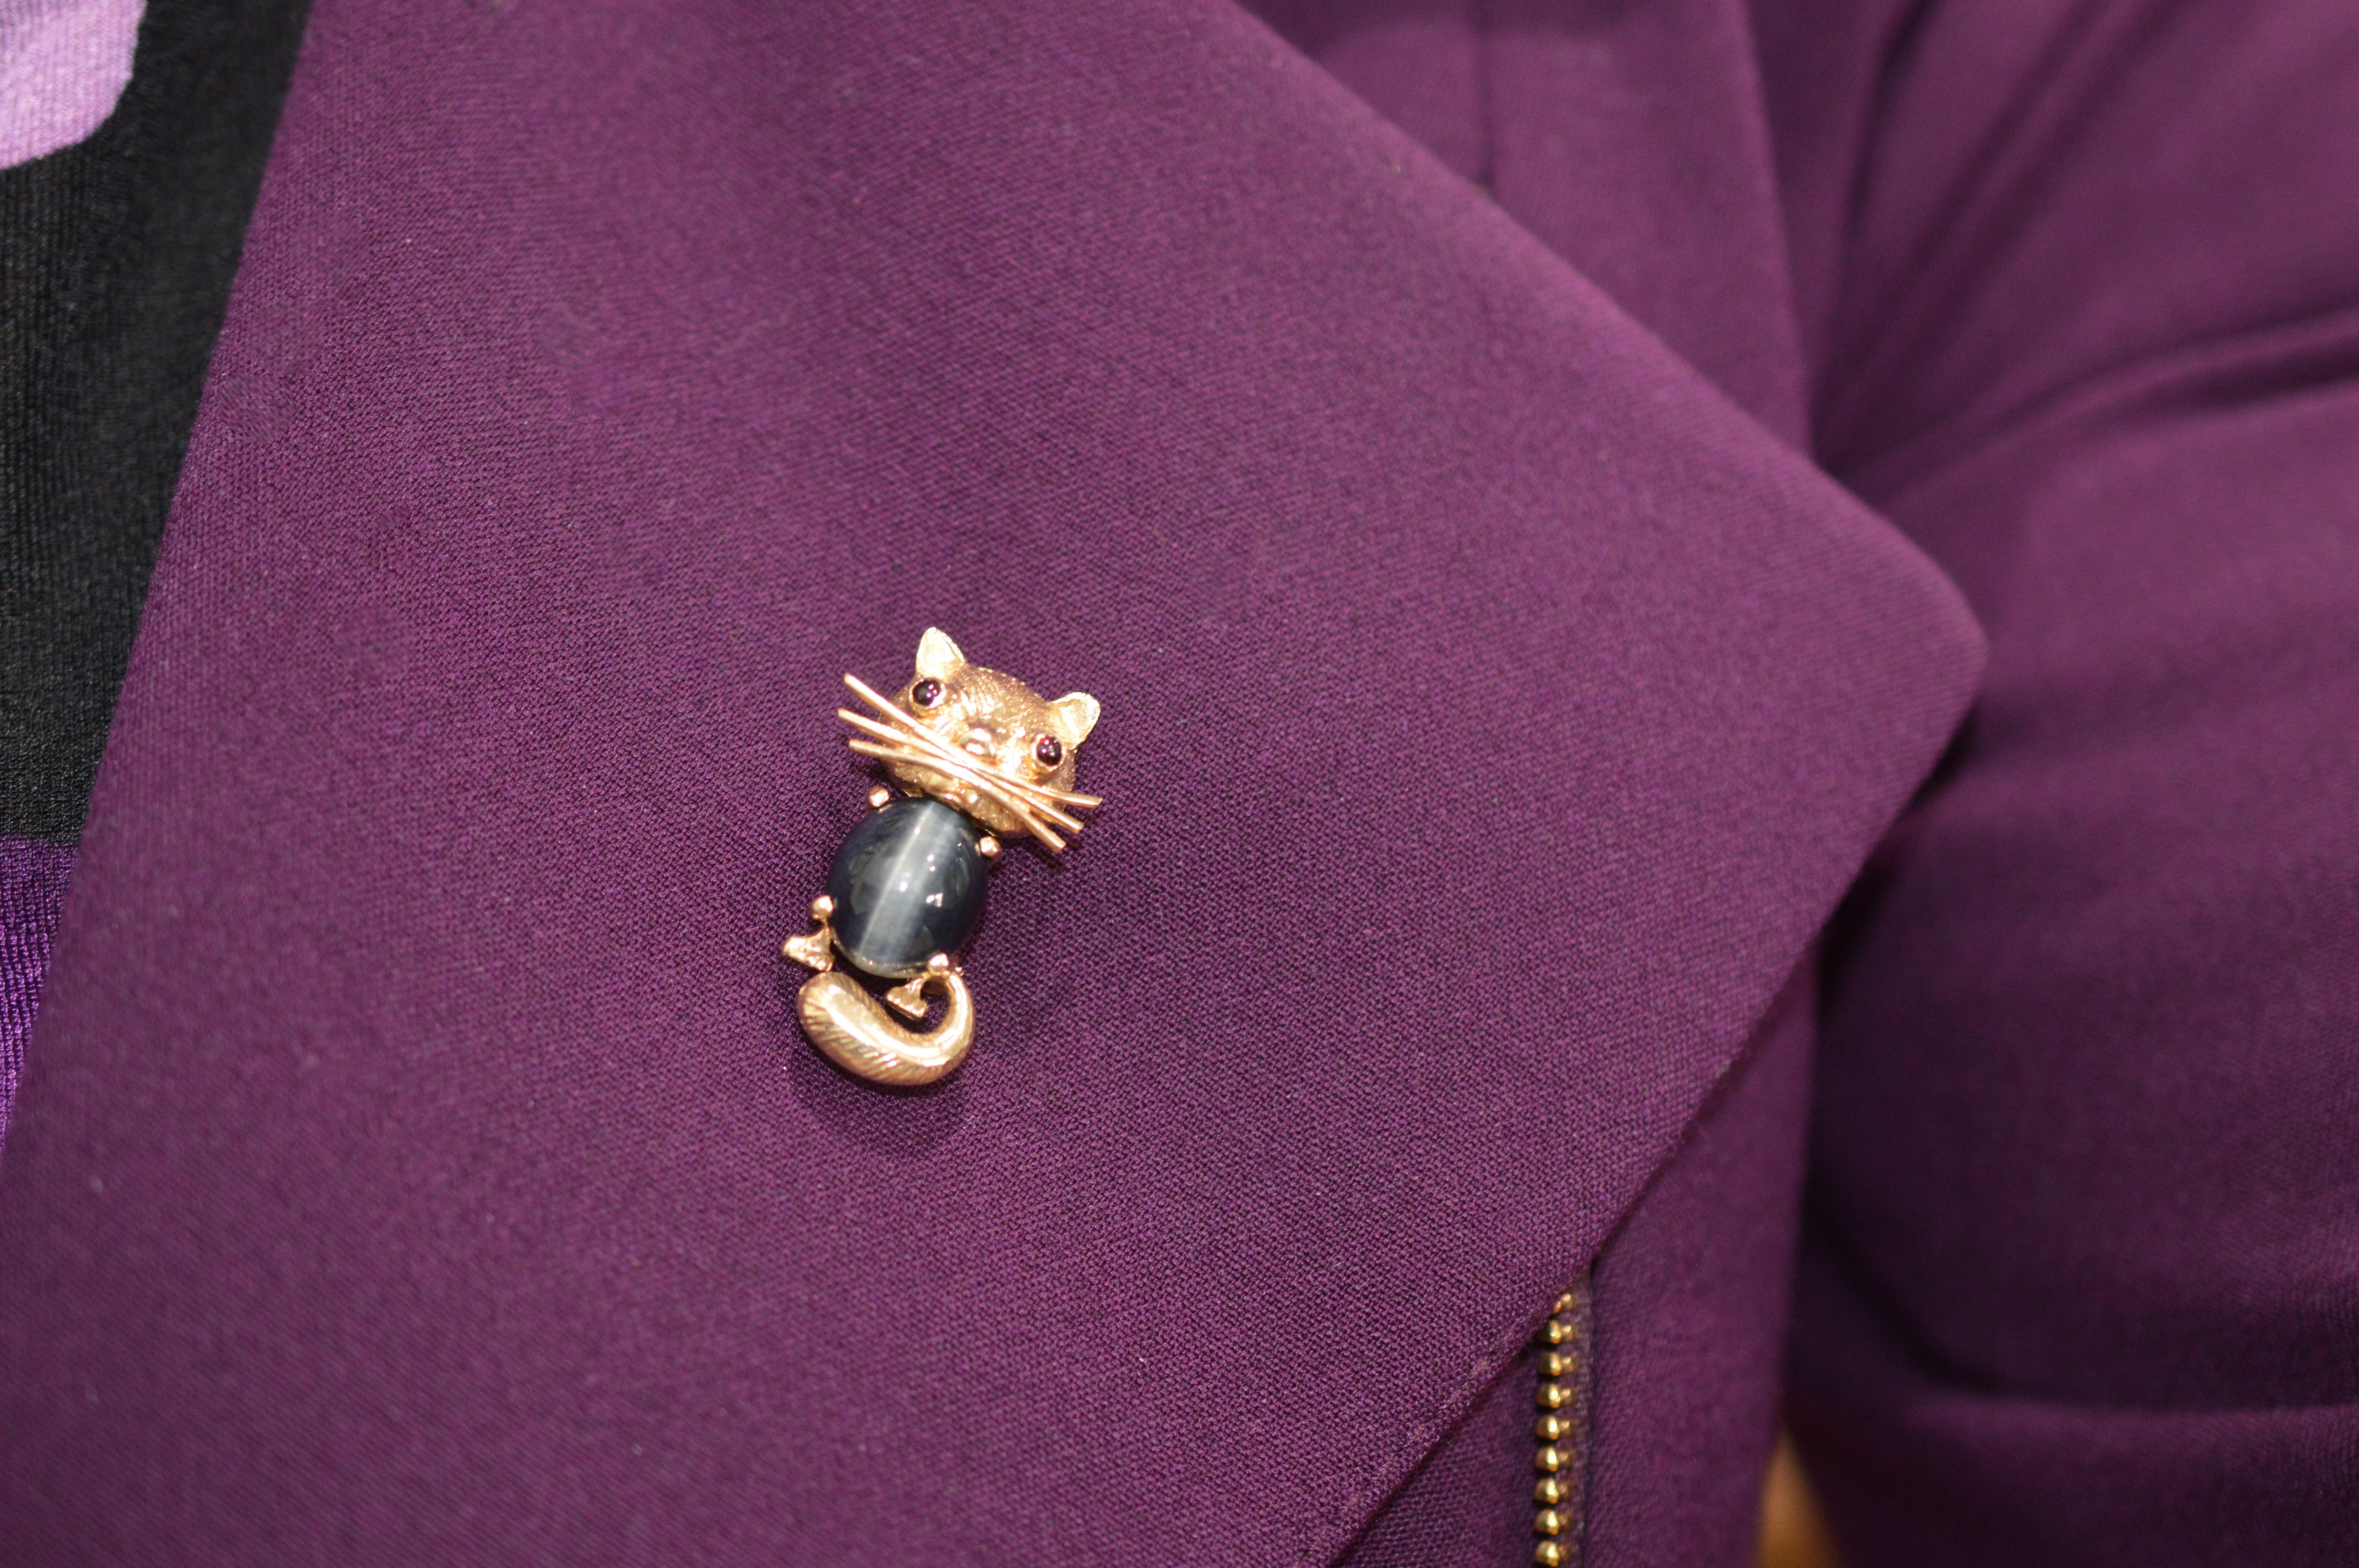 Enjoy this friendly feline lapel accent in fourteen karat yellow gold. This vintage Soret signature brooch pin by Somers Ernest Co. is crafted with a cat's eye quartz cabochon and enhanced with colorful amethyst and citrine eyes. Measures 1-1/8 inch